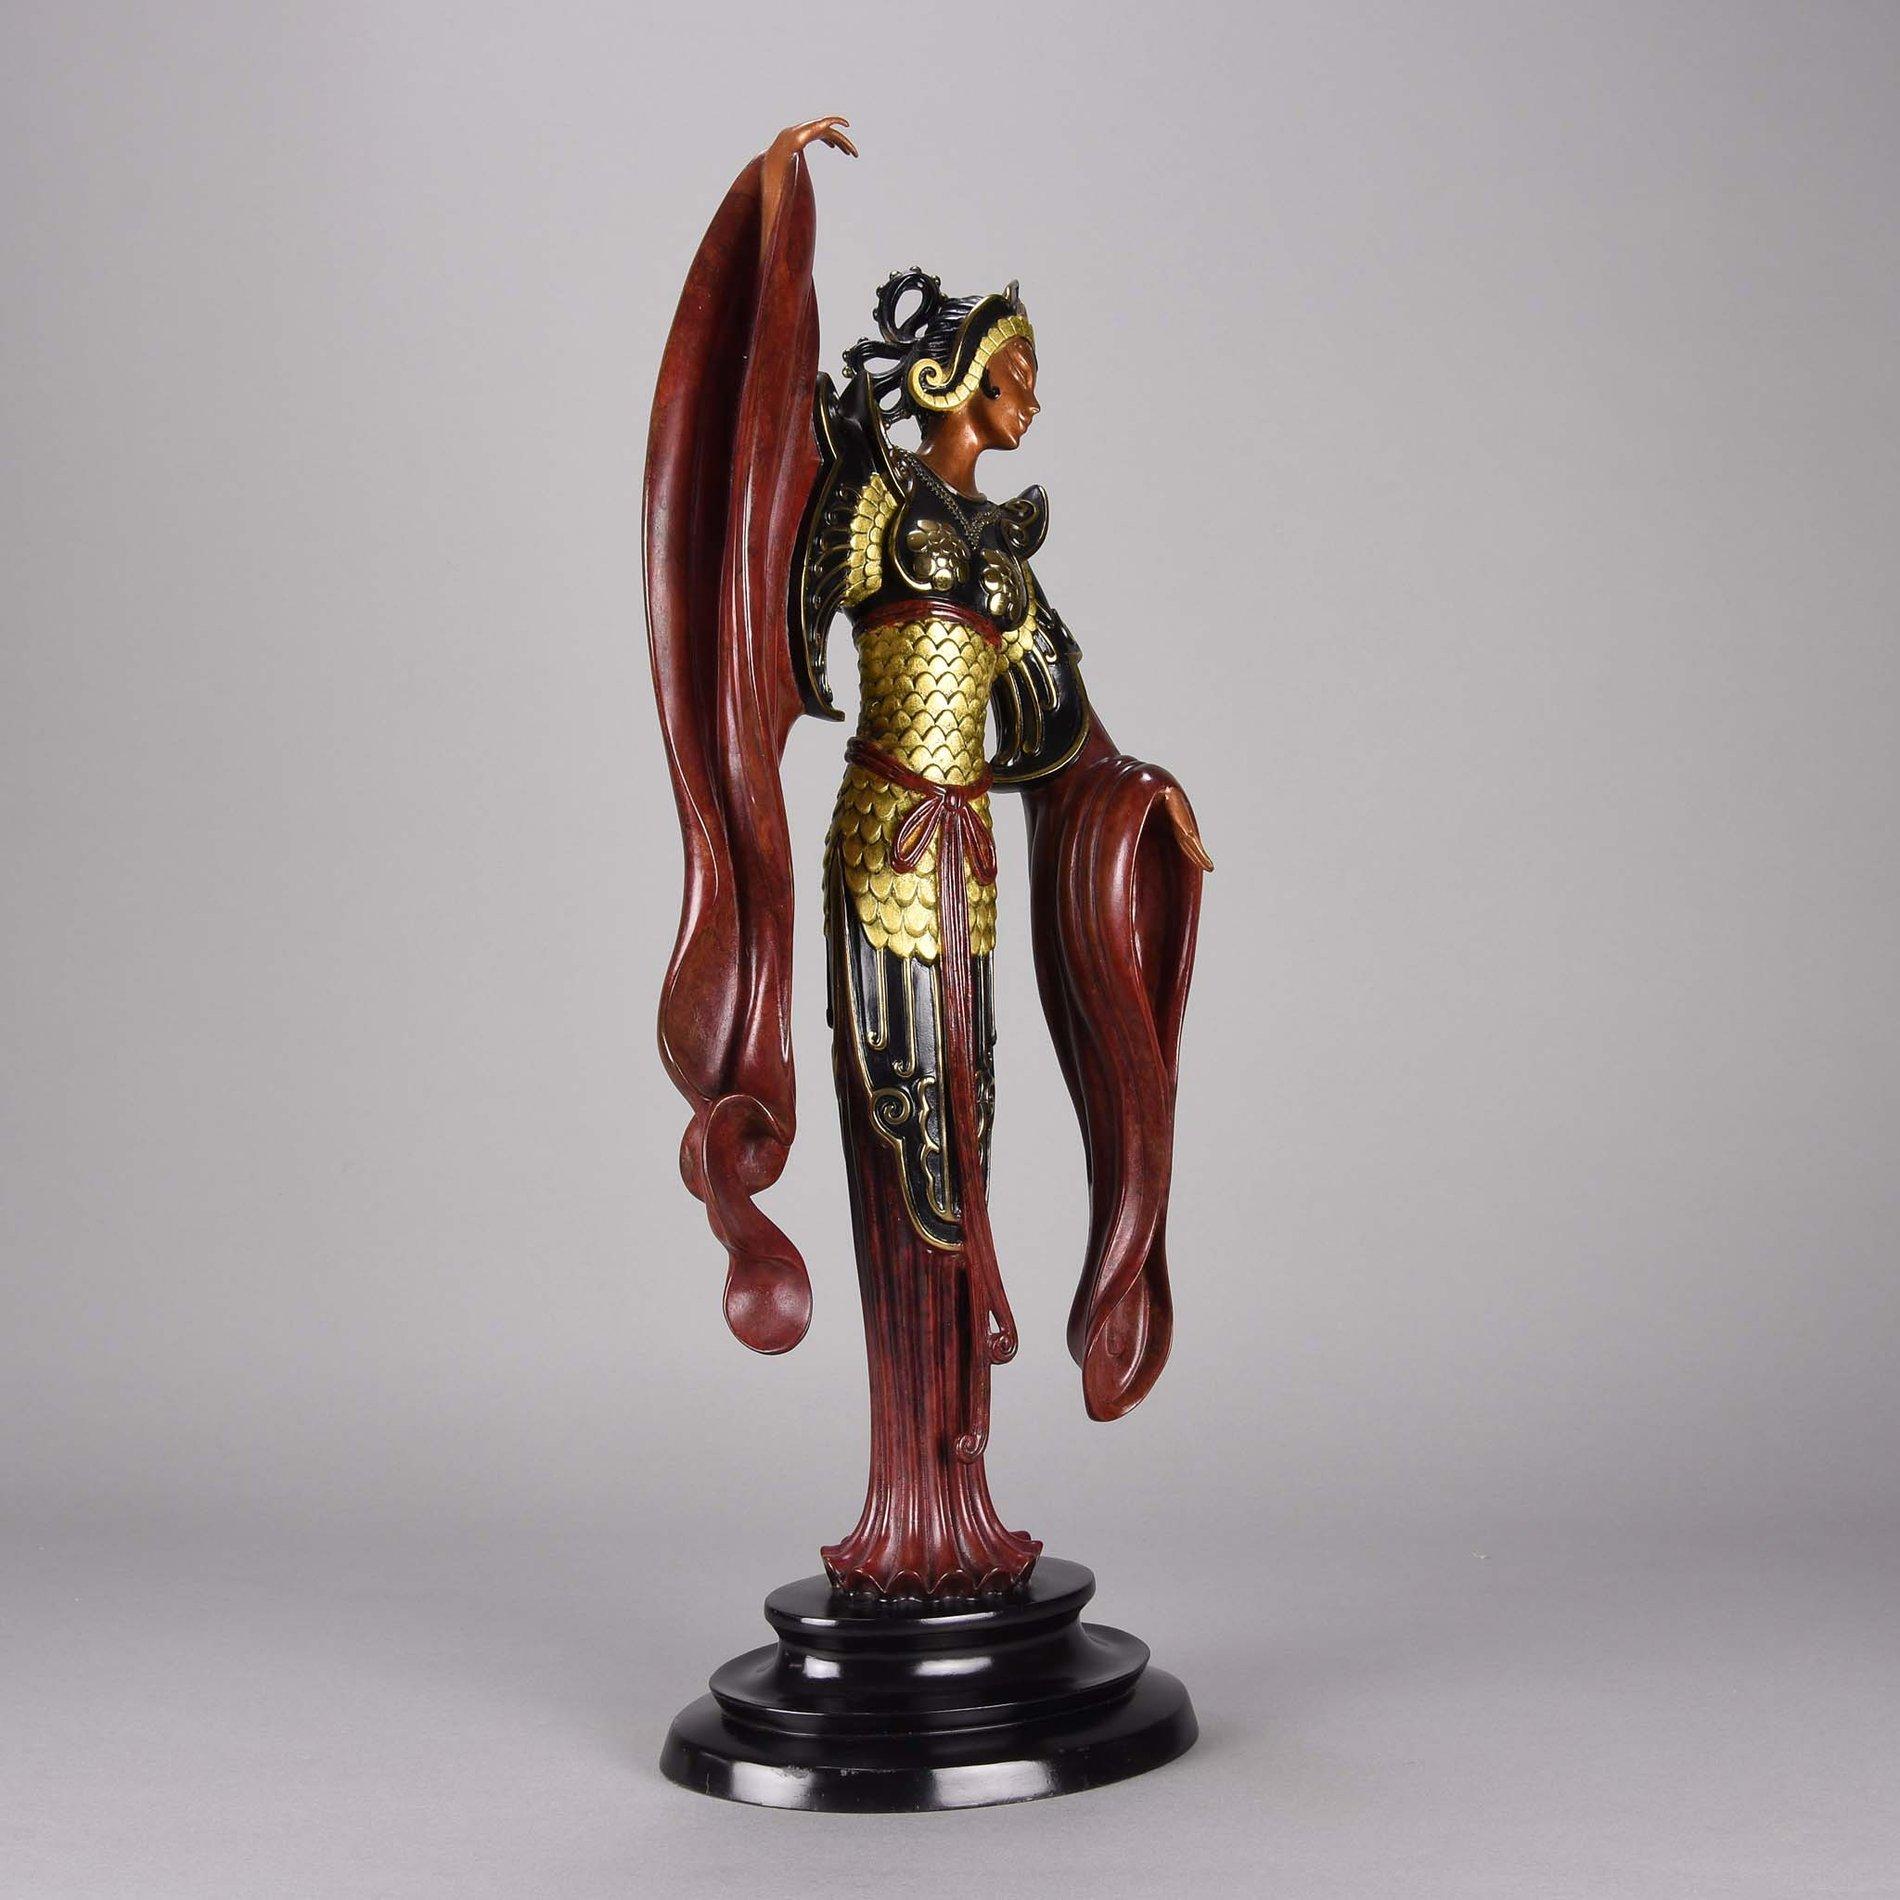 An eye-catching limited edition cold painted Art Deco bronze figure of an elegant beauty in a full length costume resembling a Fenghuang. The bronze surface with excellent color and detail, signed Erté, numbered 50/500, dated 1988 and with foundry